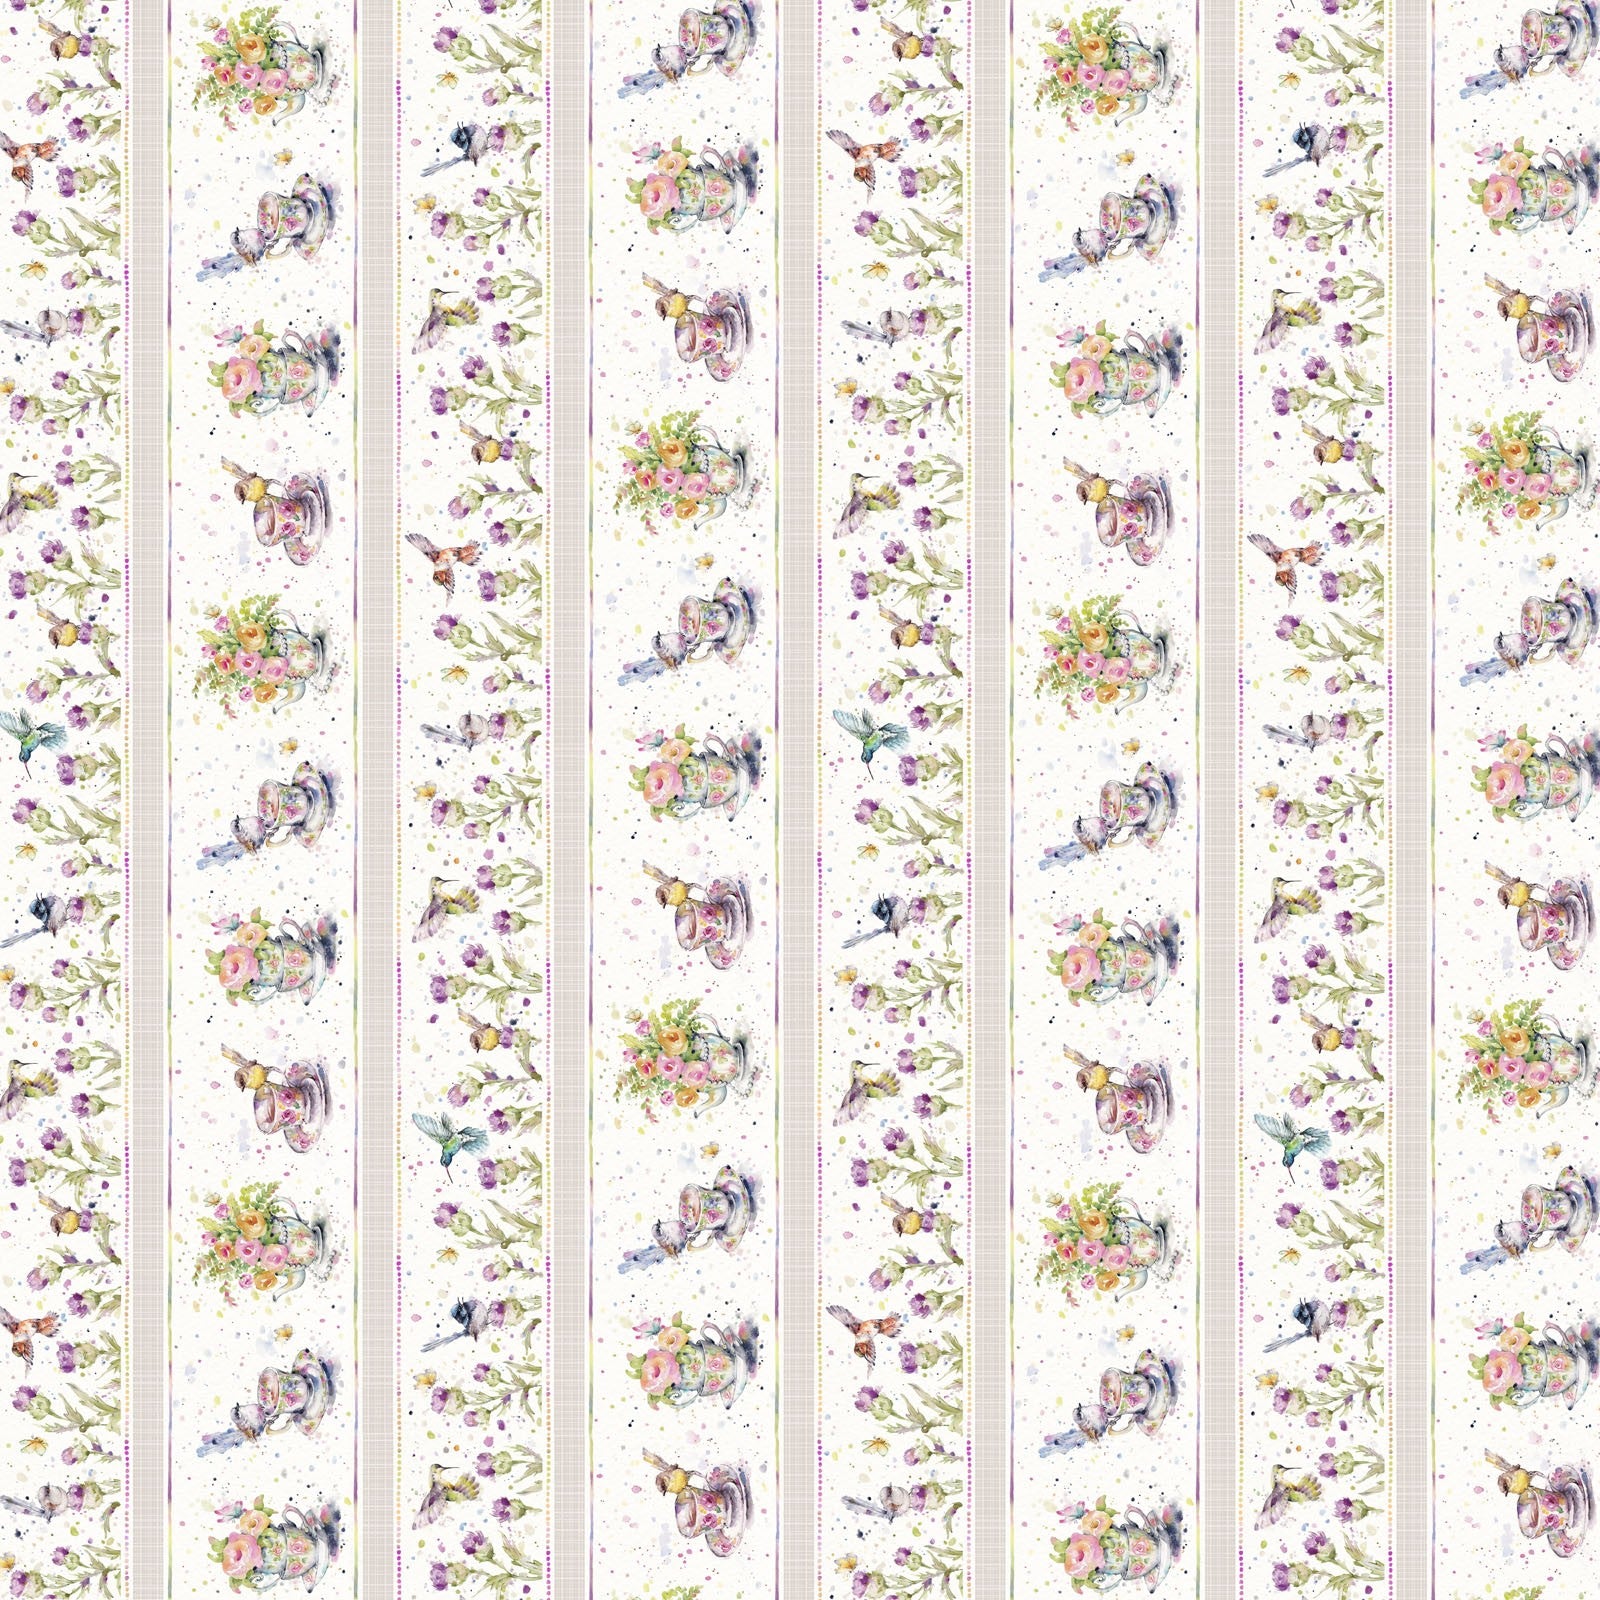 Flowers and Feathers Cotton Fabric P & B Textiles 4470 Multi